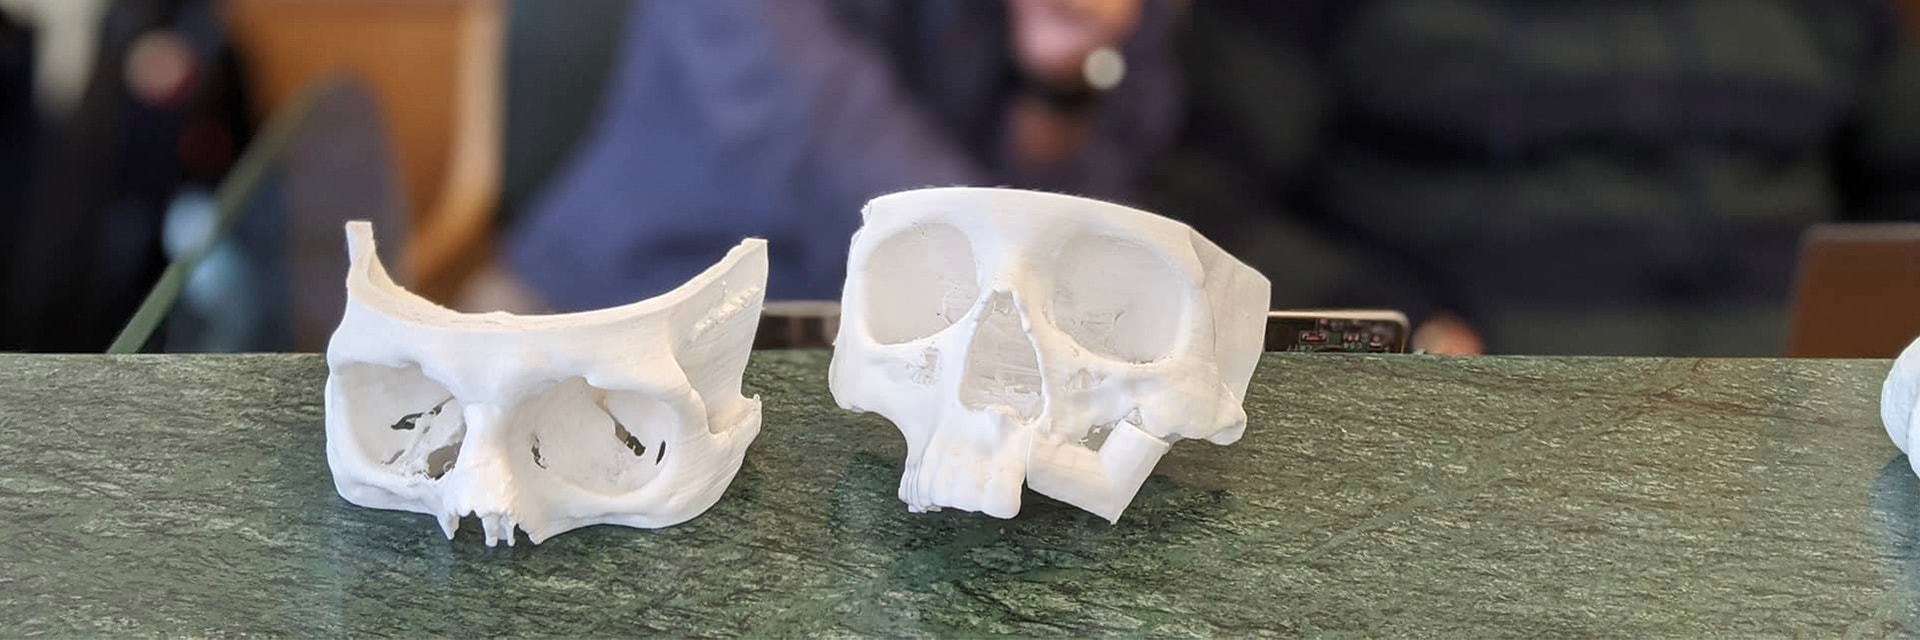 3D-printed skulls on a table 